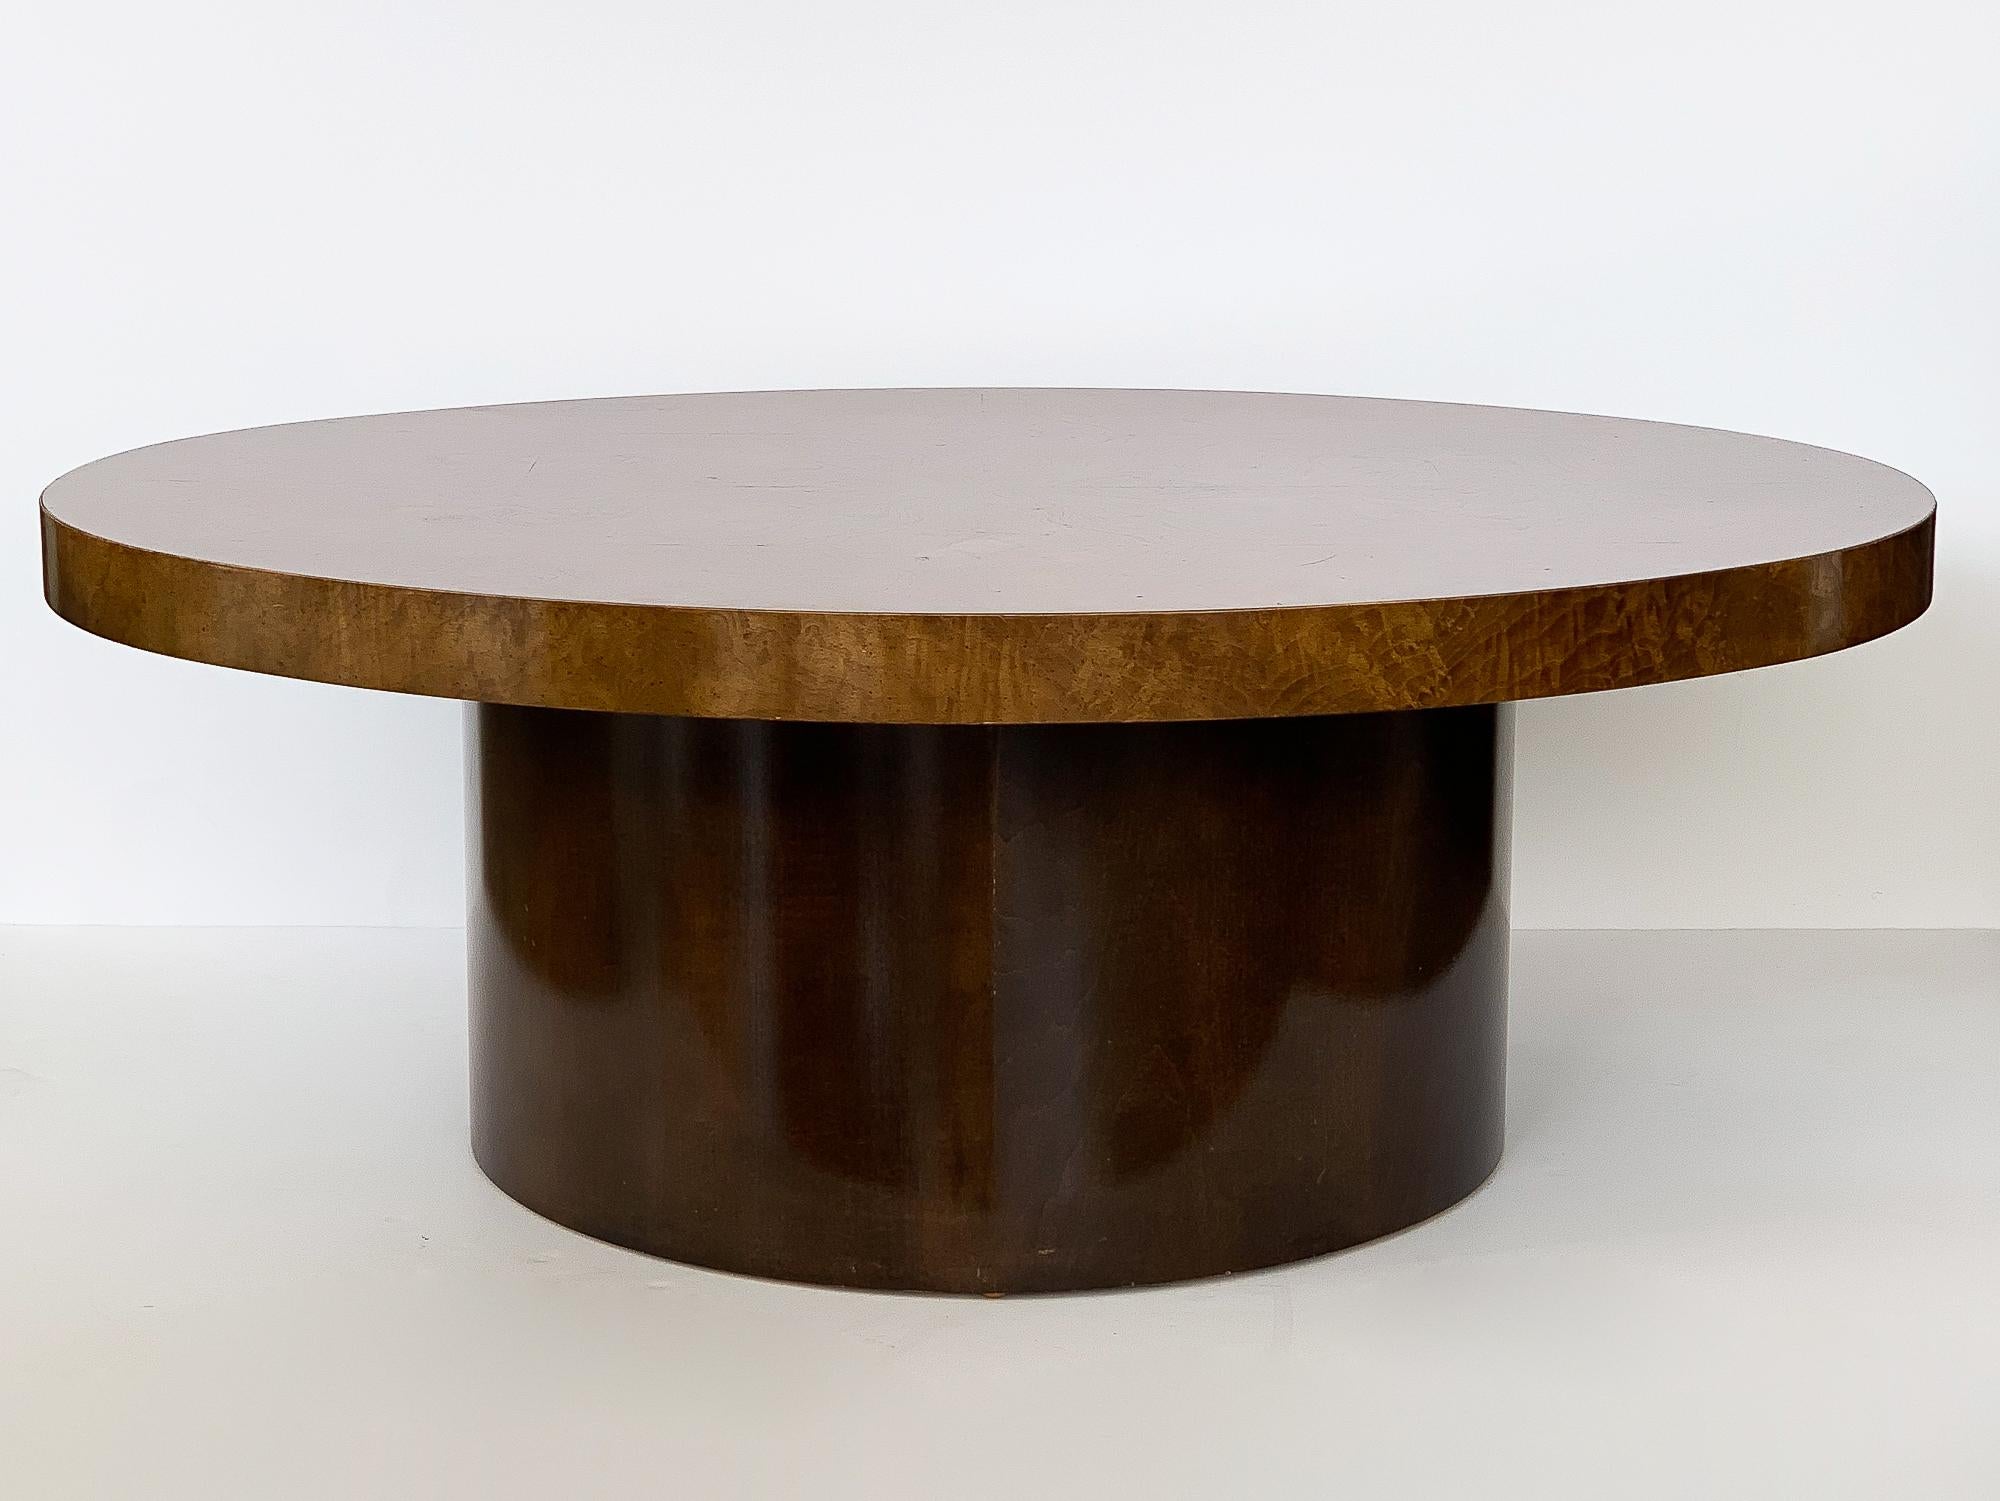 Burl wood oval coffee table with round pedestal base, circa 1970s. Oval shaped top in a bookmatched burl wood veneer. 26